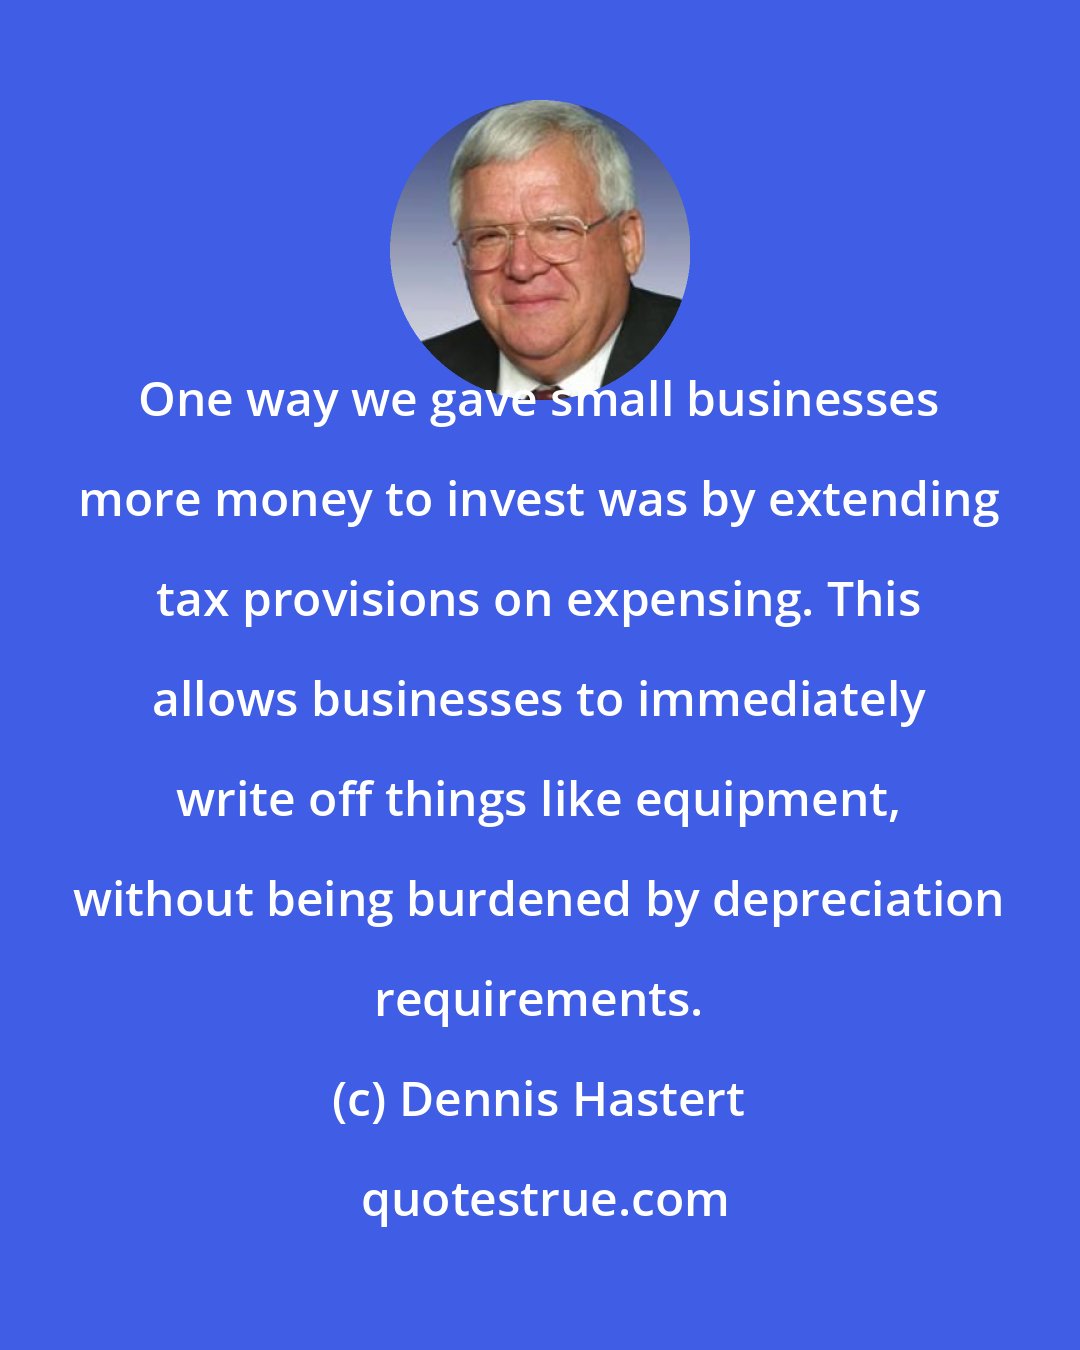 Dennis Hastert: One way we gave small businesses more money to invest was by extending tax provisions on expensing. This allows businesses to immediately write off things like equipment, without being burdened by depreciation requirements.